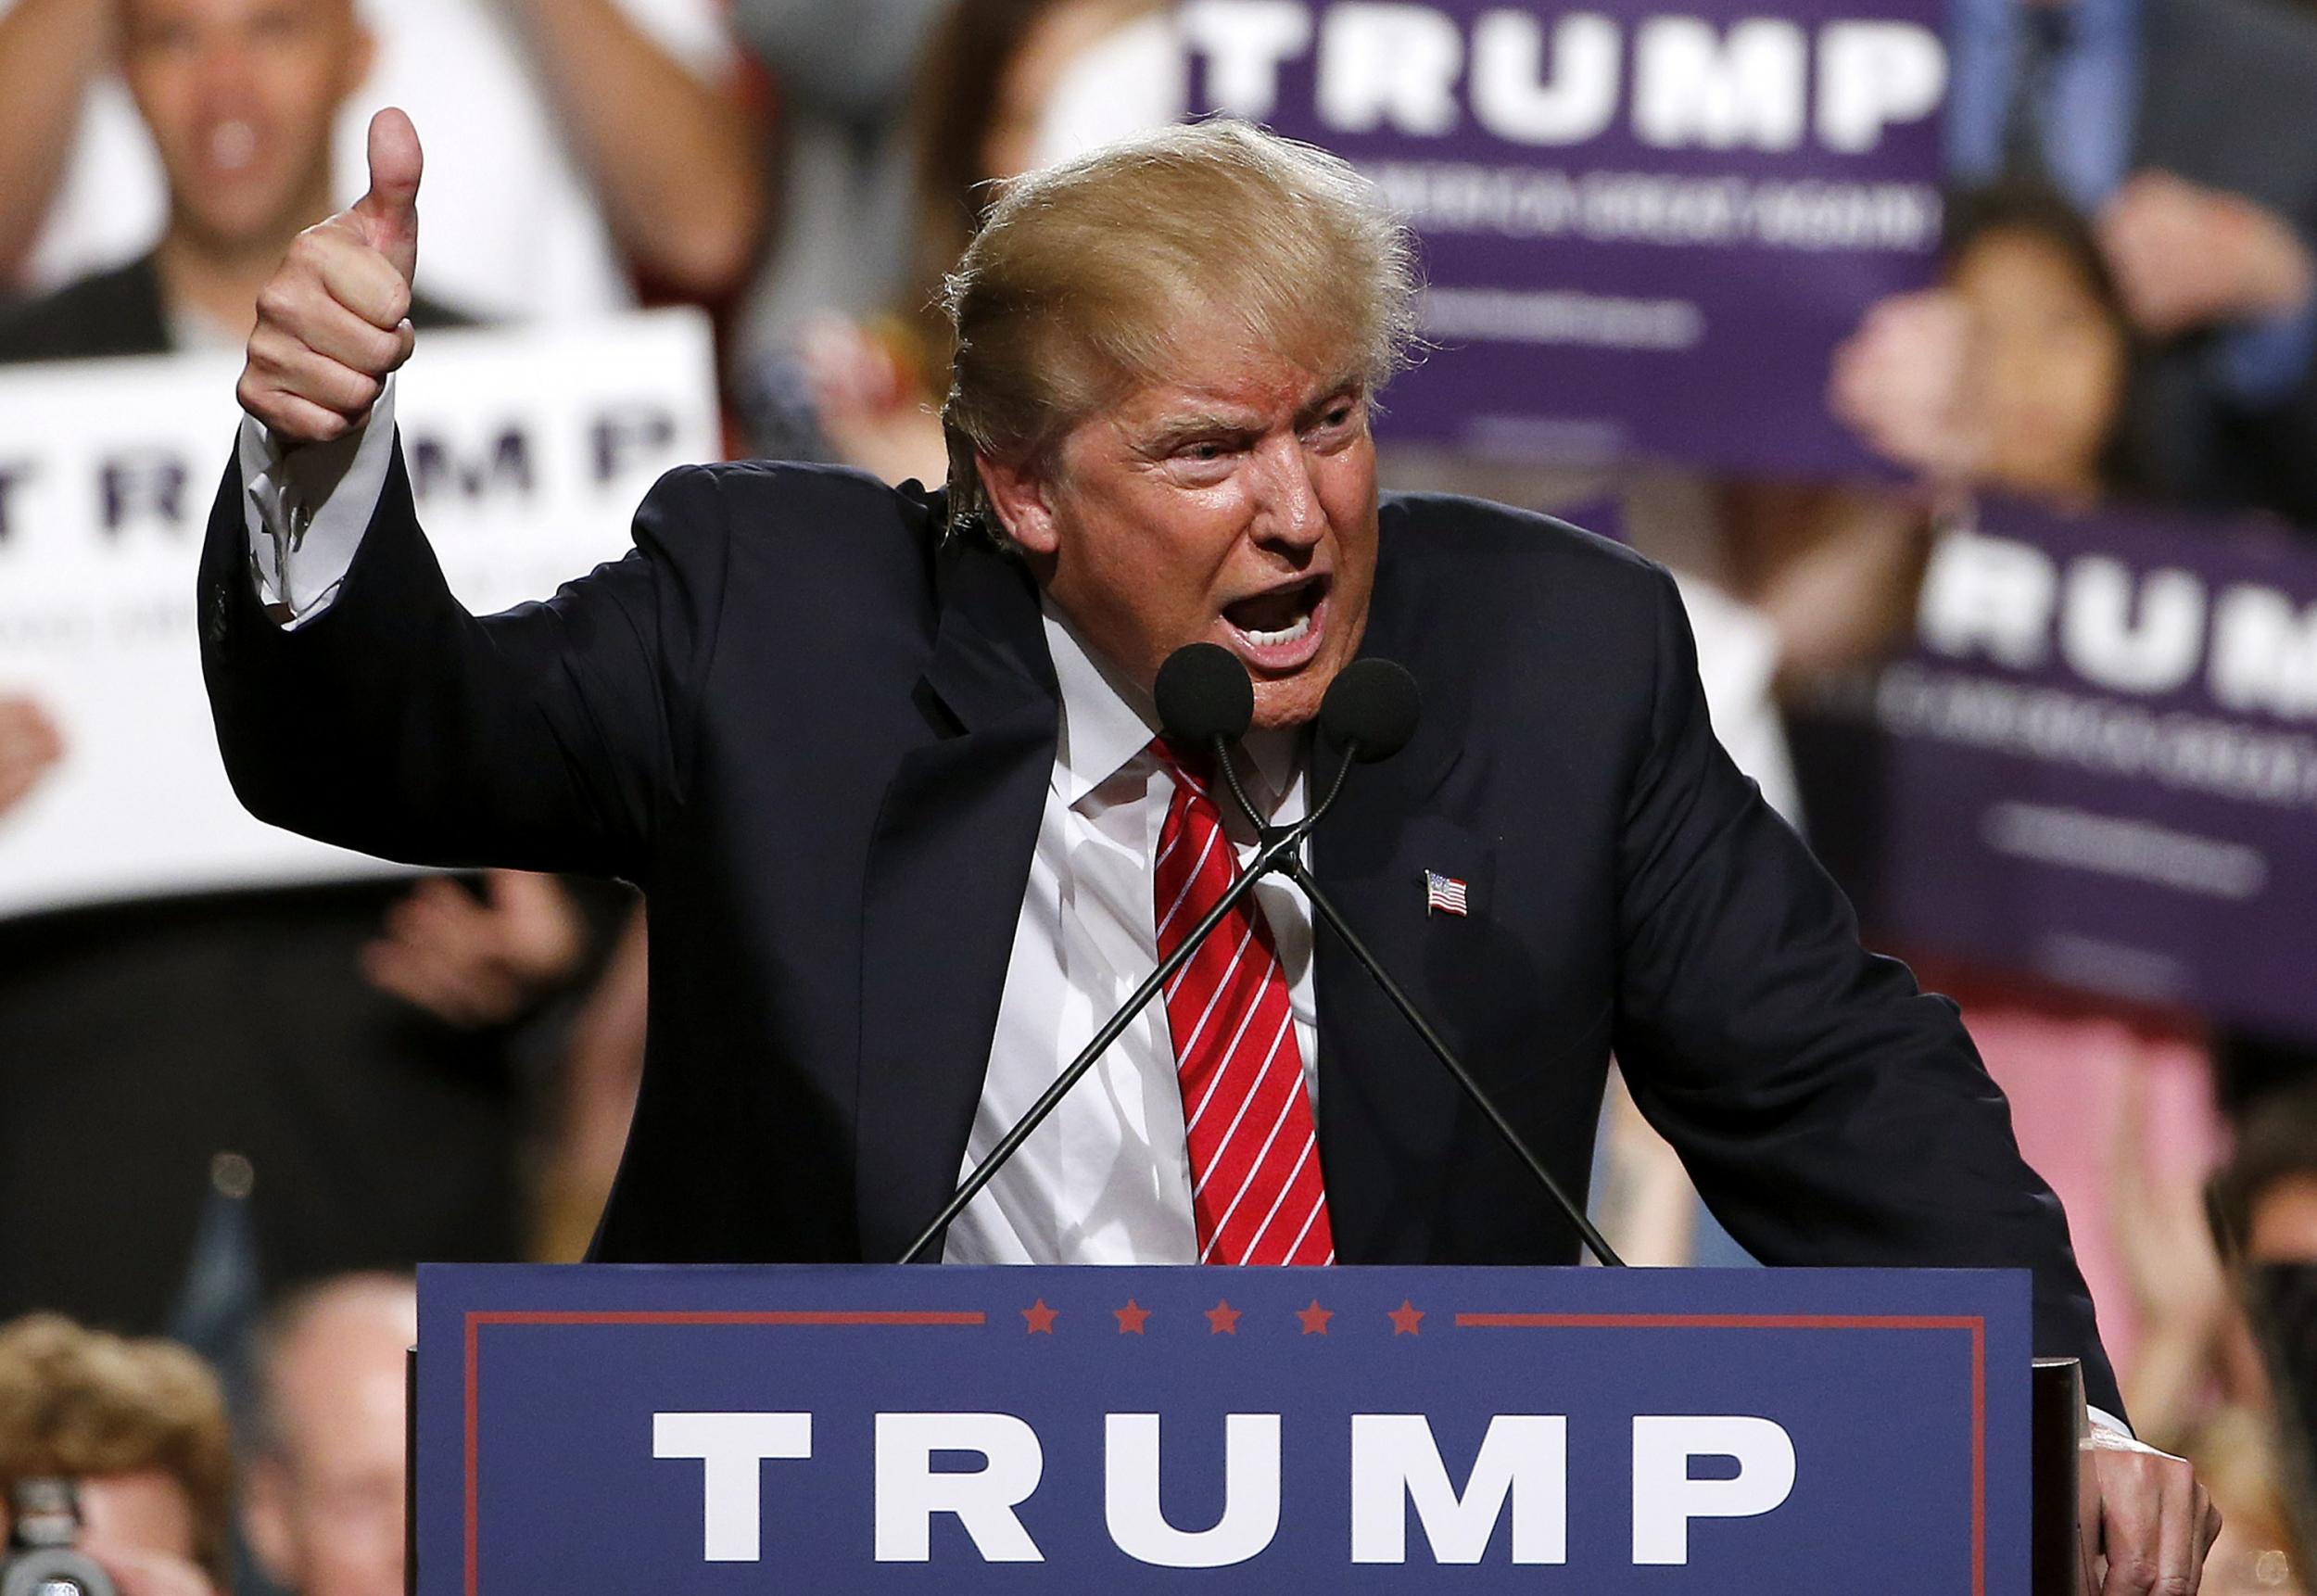 A file photo shows Donald Trump speaking in Phoenix during the 2016 campaign